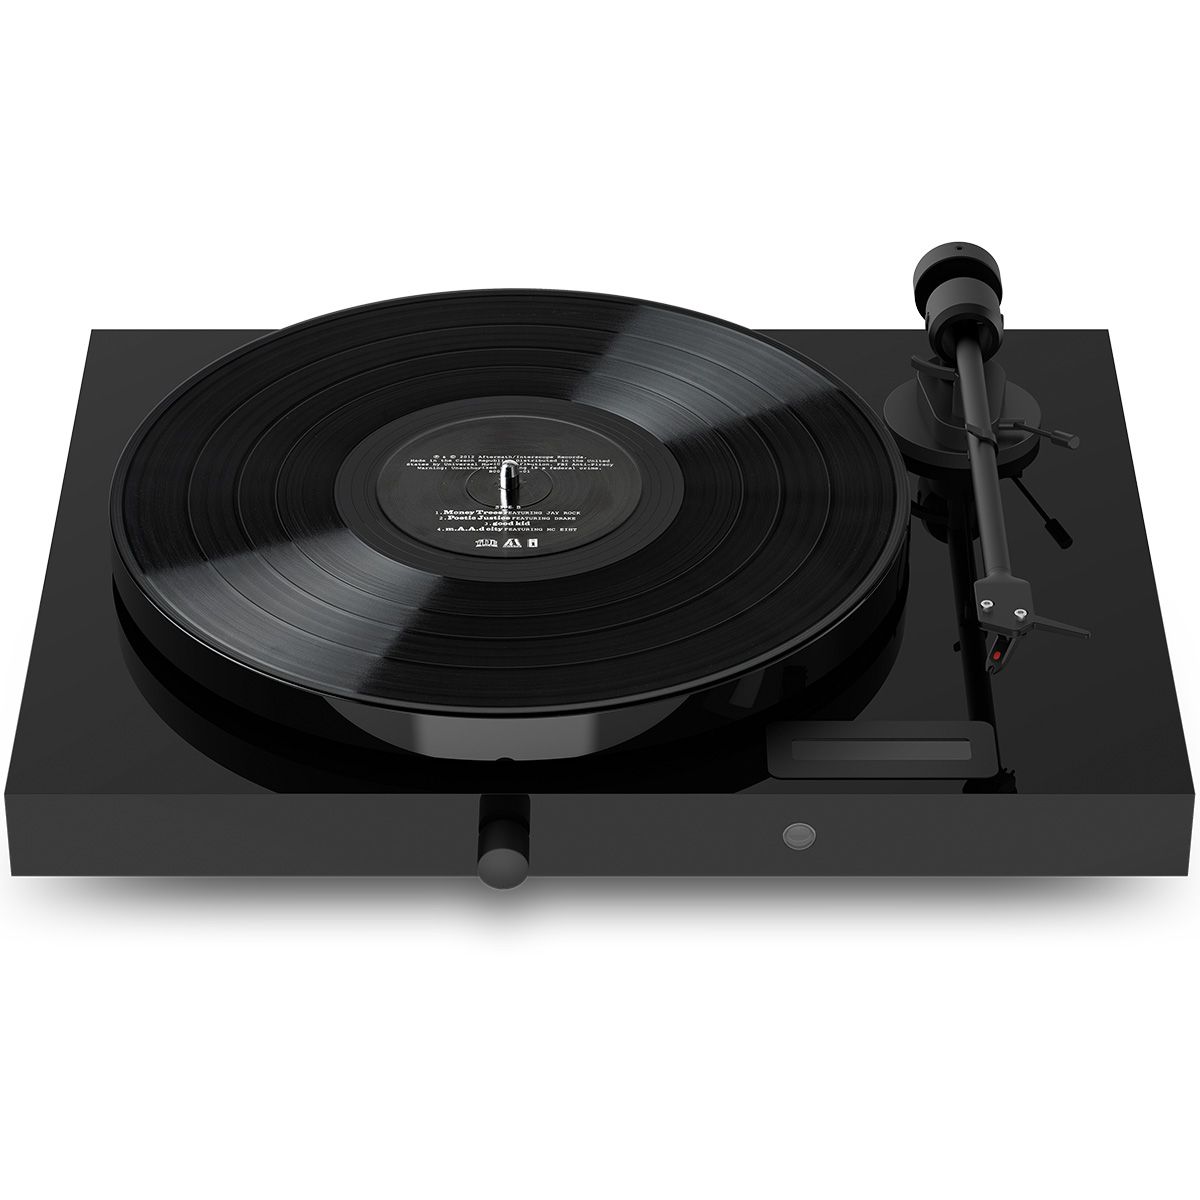 Pro-Ject Juke Box E1 Turntable in black top view